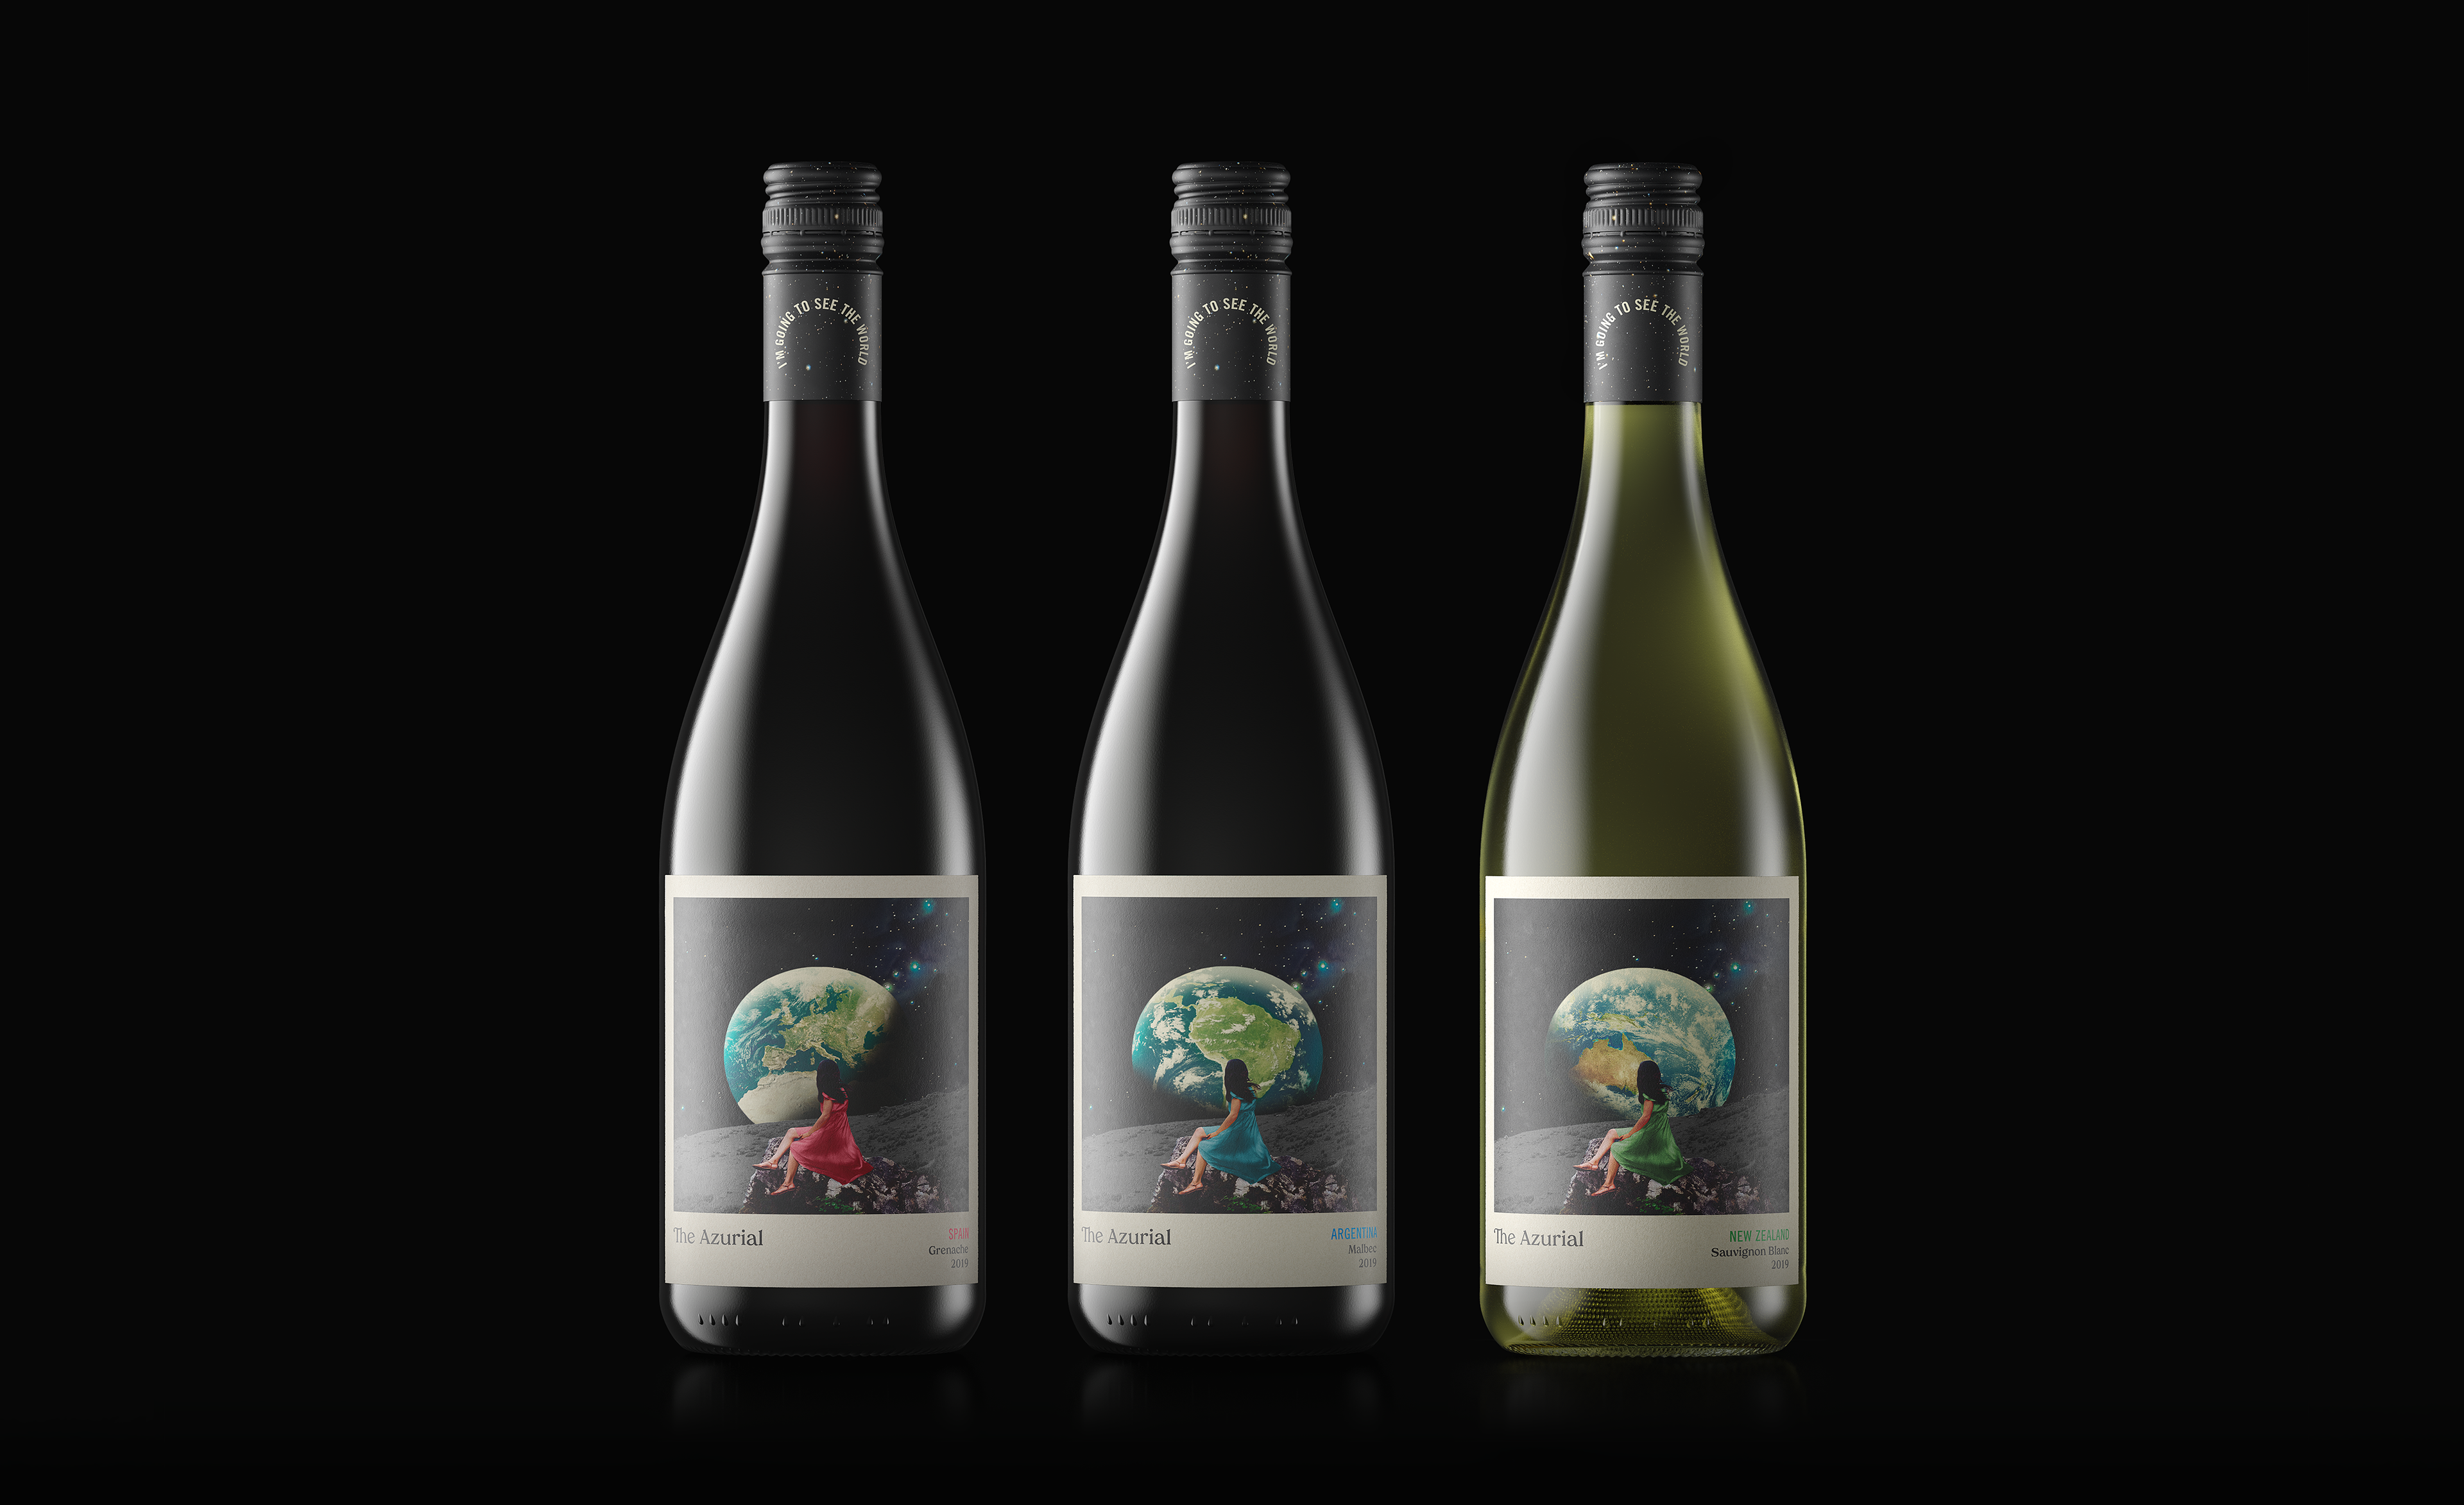 Three bottles of The Azurial wine brand on a black background, packaging design by Our Revolution London Sydney